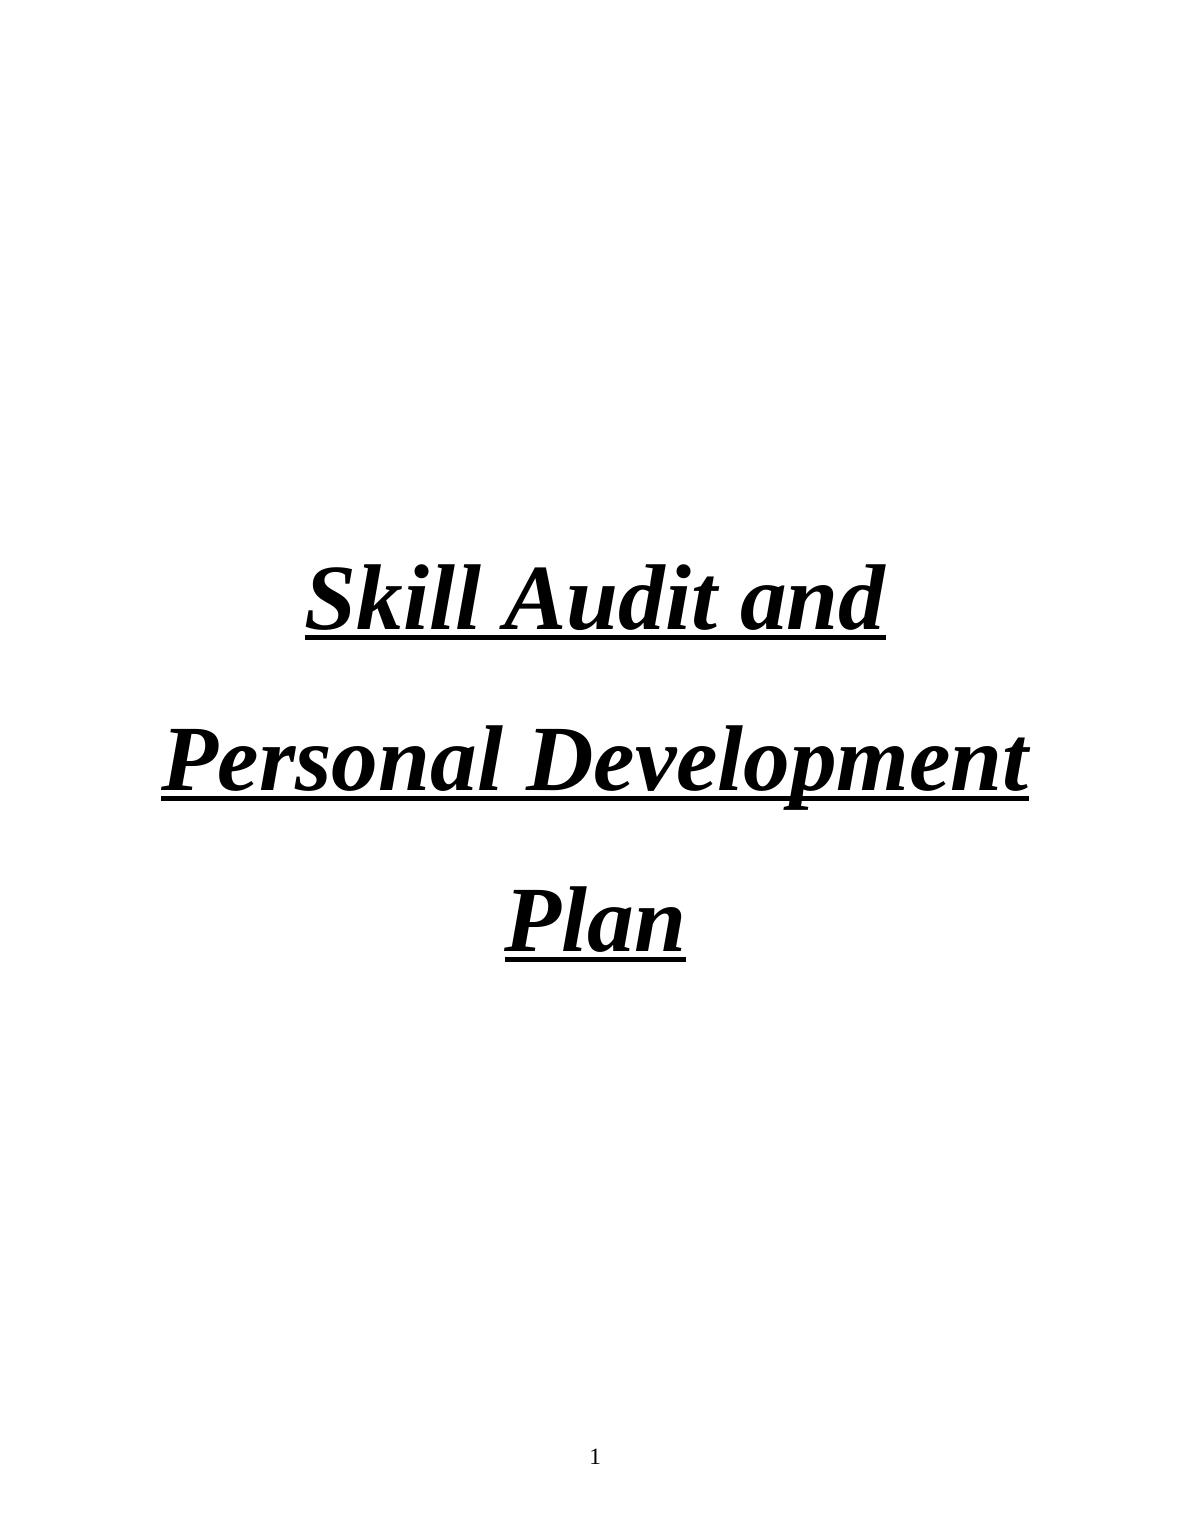 Skill Audit and Personal Development Plan_1